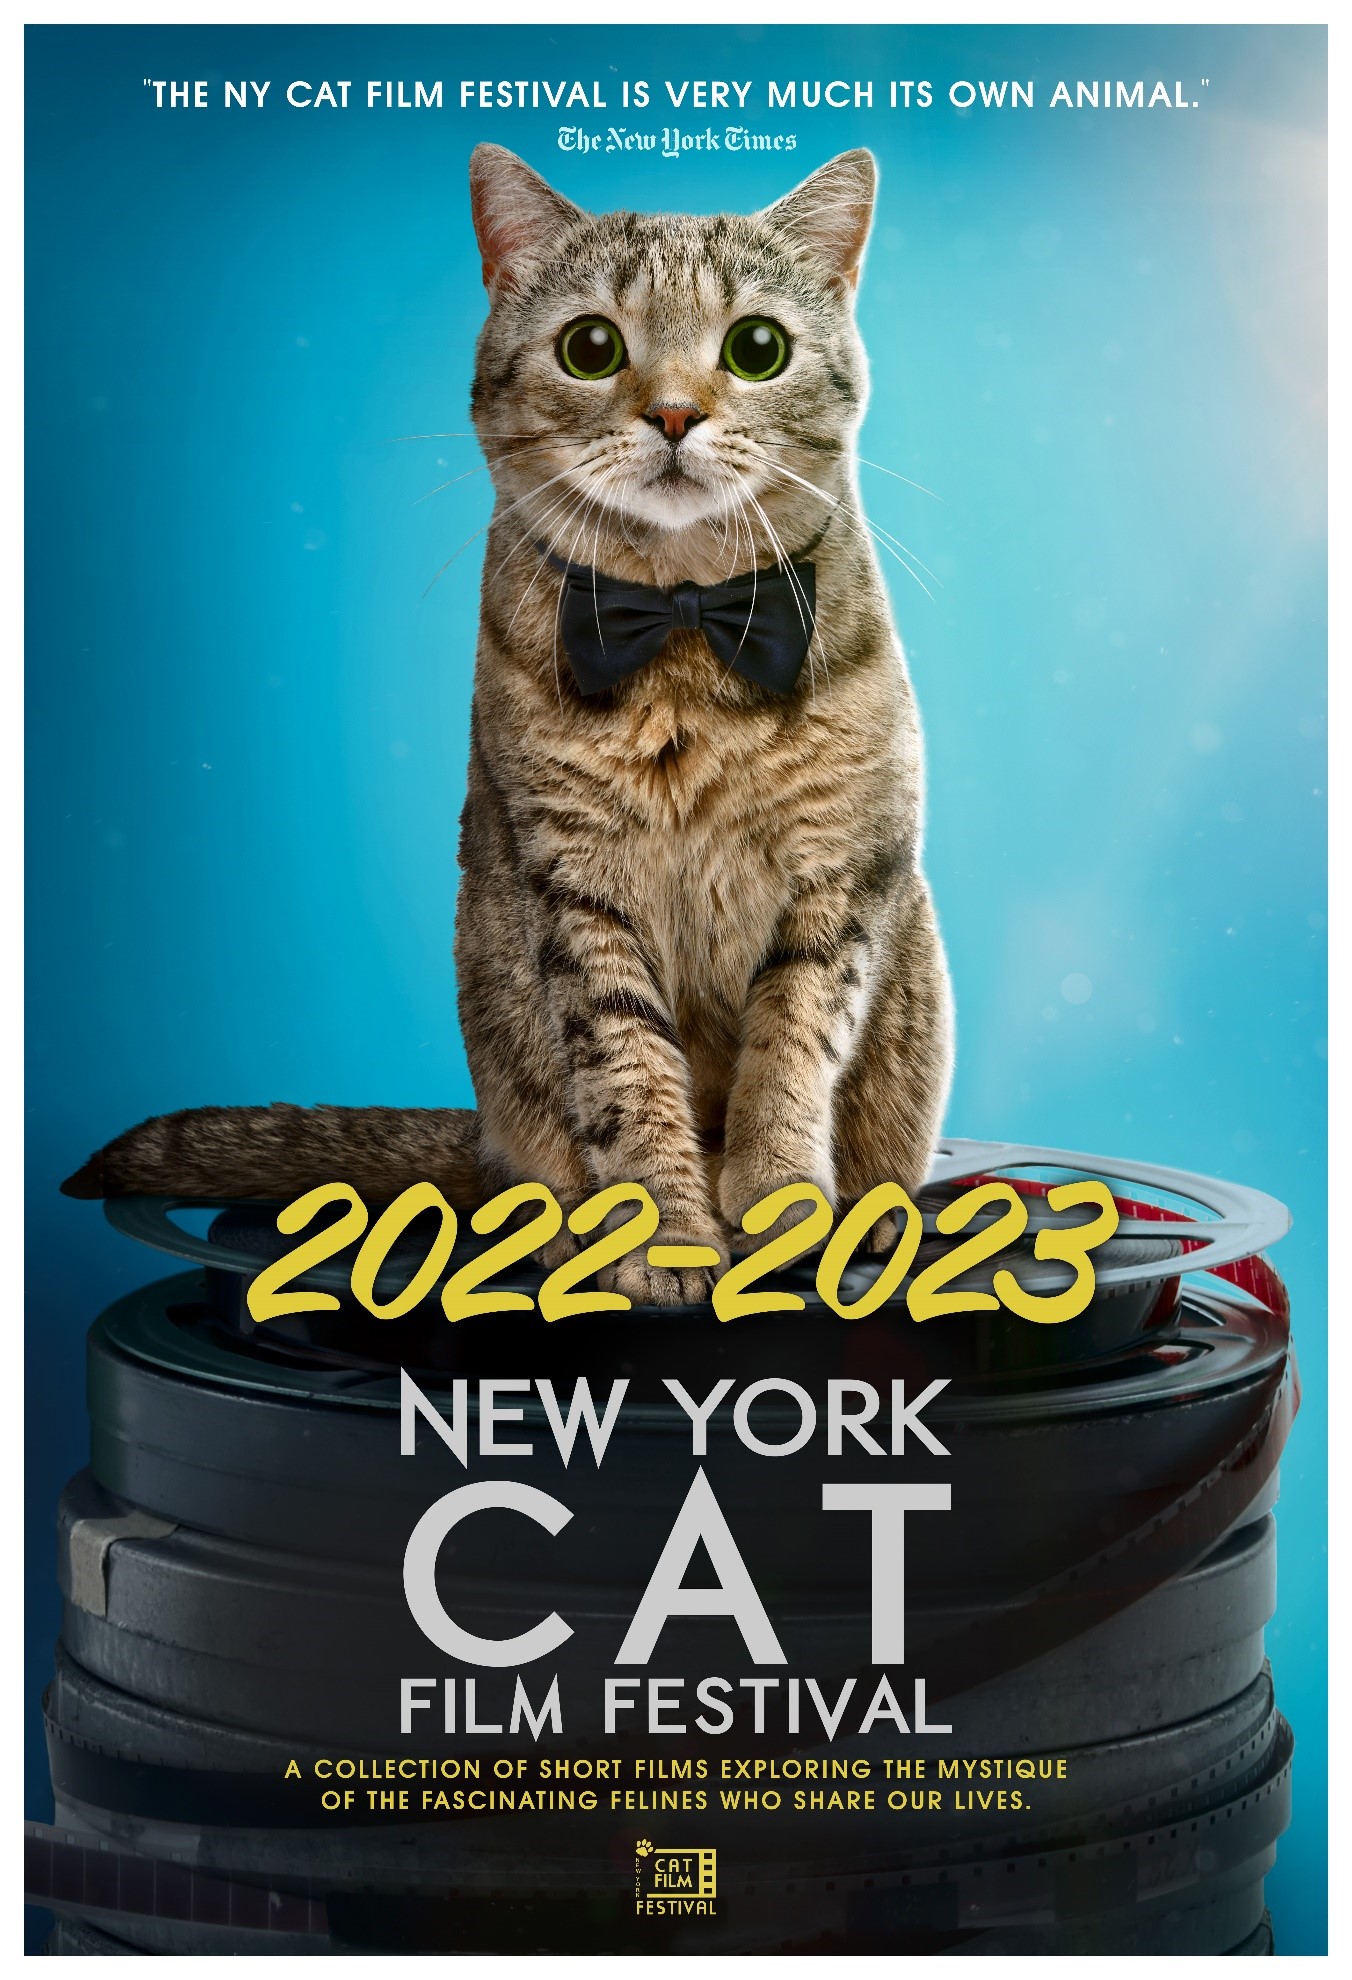 Film poster for the 5th Annual NY Cat Film Festival